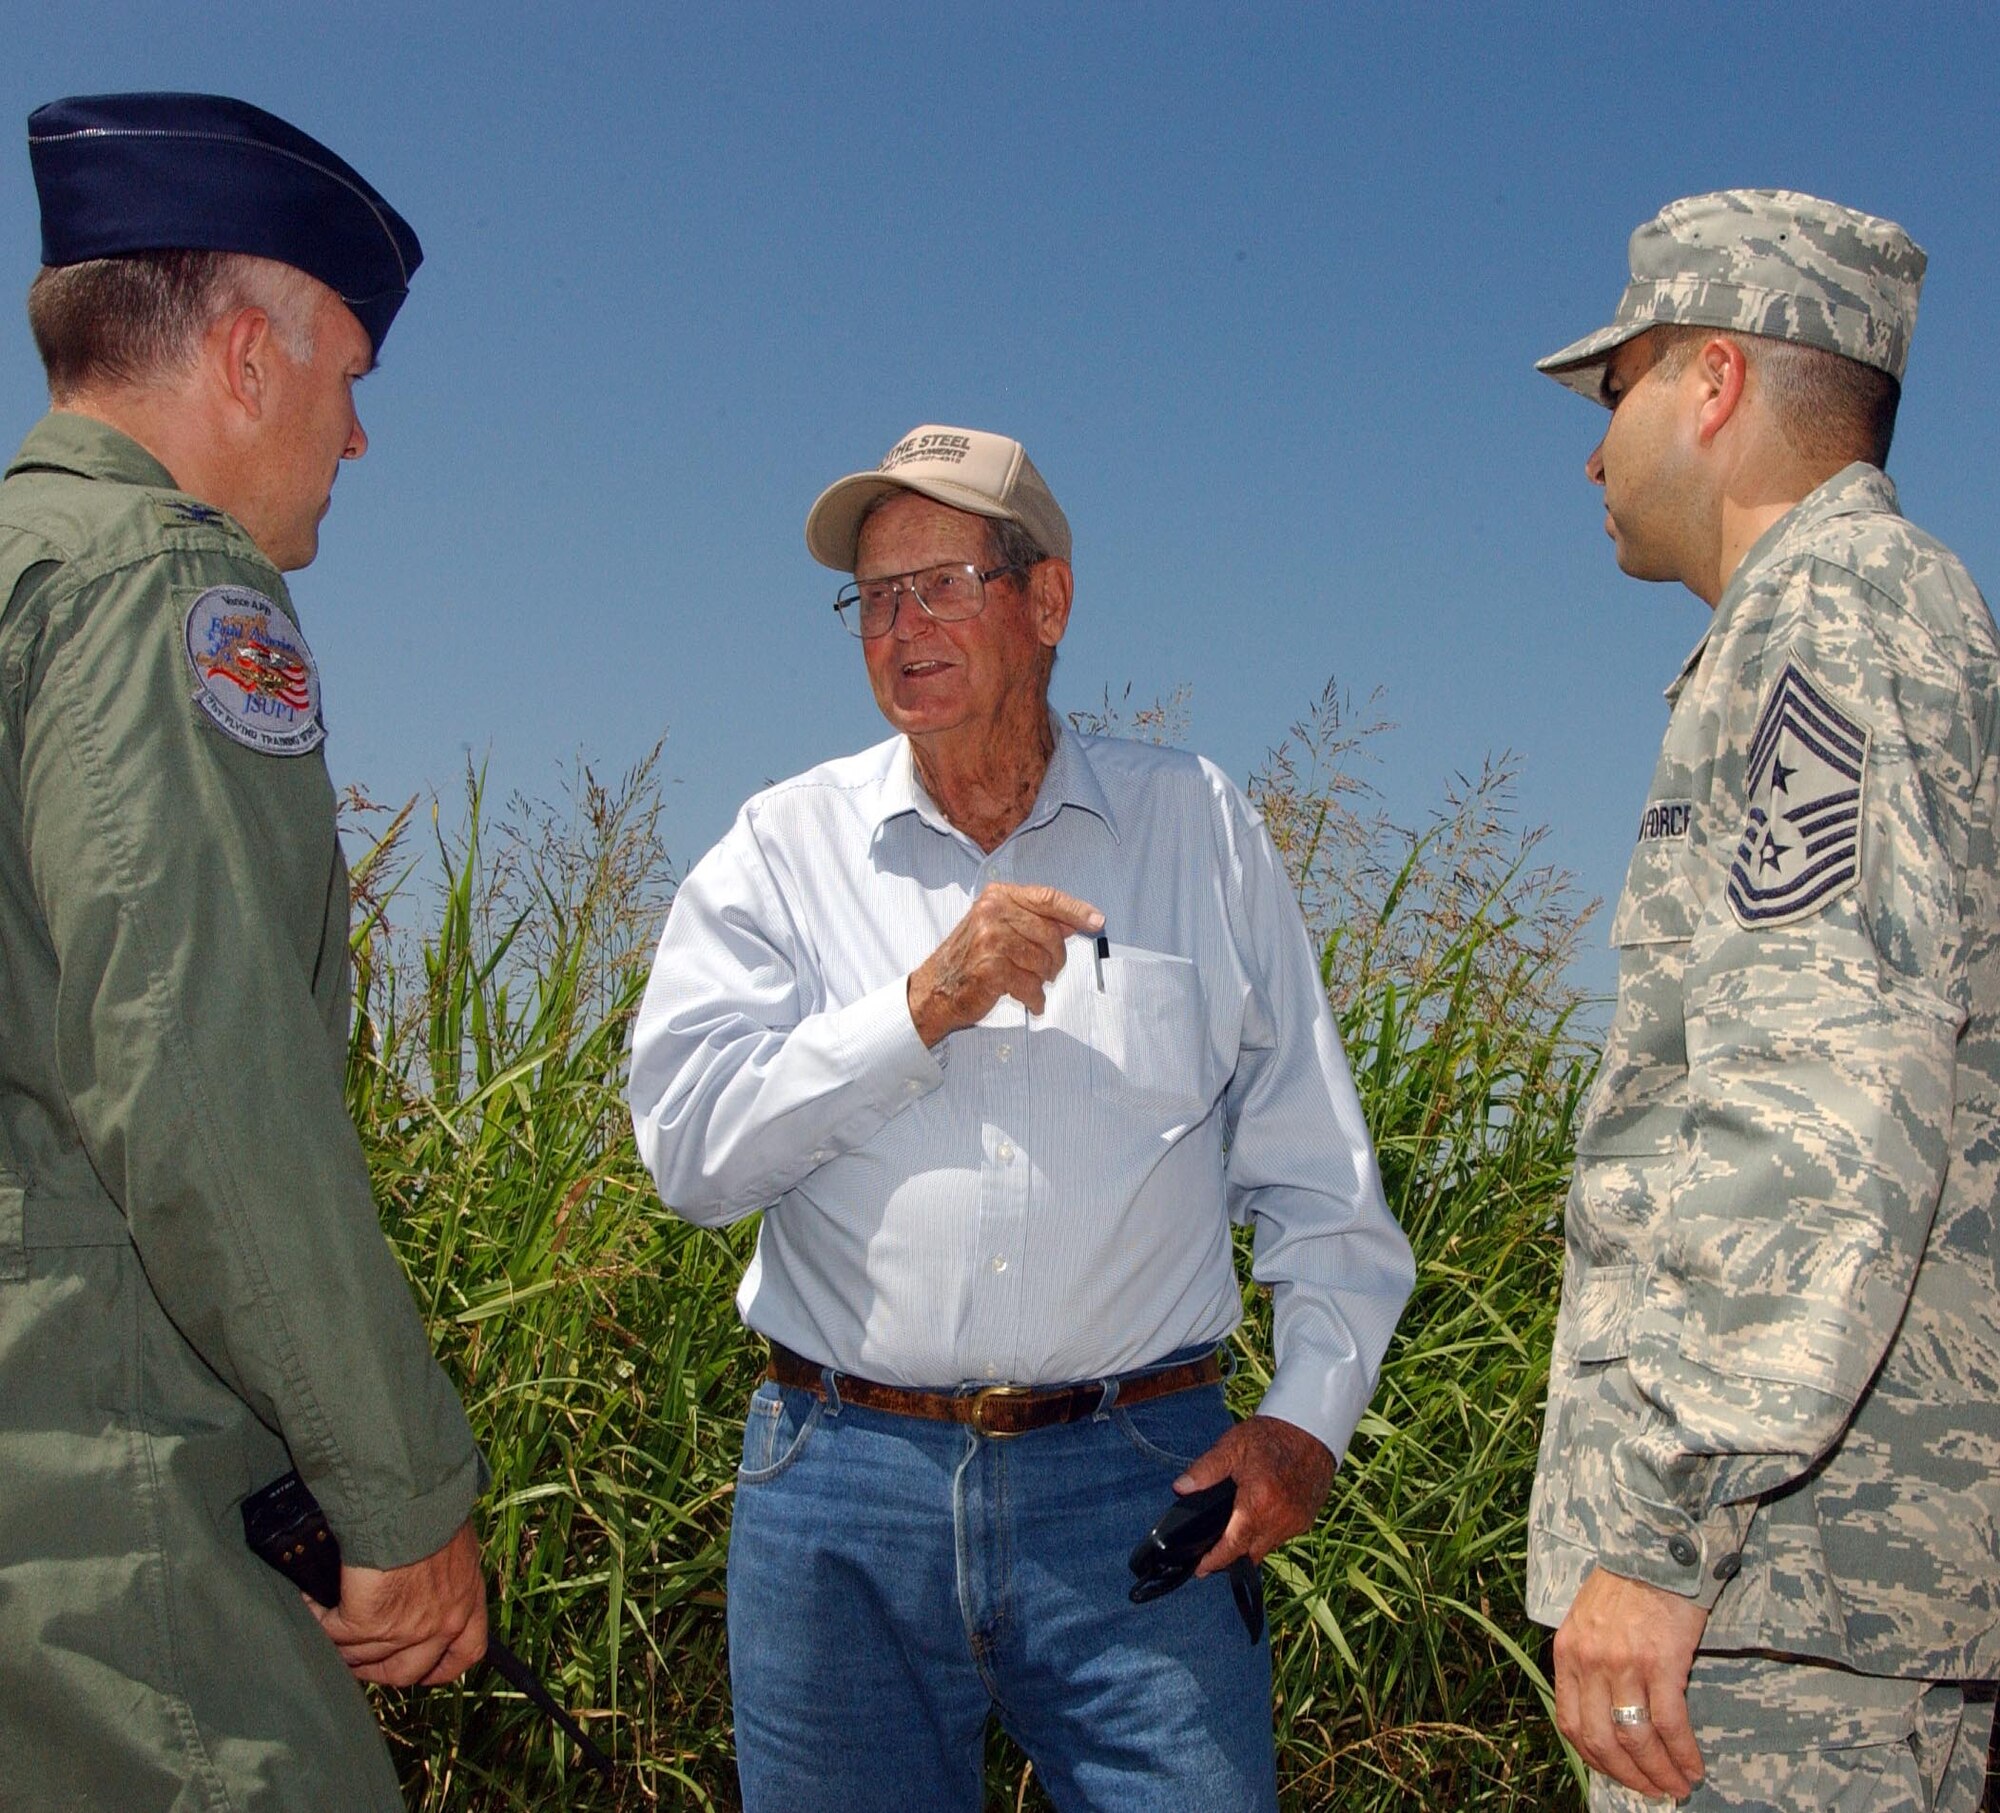 Bob Klemme, center, tells Col. Richard Murphy, the 71st Flying Training Wing vice commander, left, and Chief Master Sgt. Ruben Gonzalez, 71st FTW command chief, about the day-to-day hardships of cowboys driving cattle along the historic Chisholm Trail. Mr. Klemme plans to place a trail marker along the south side of Vance AFB where the trail crosses onto base property. (U.S. Air Force photo by Joe B. Wiles)